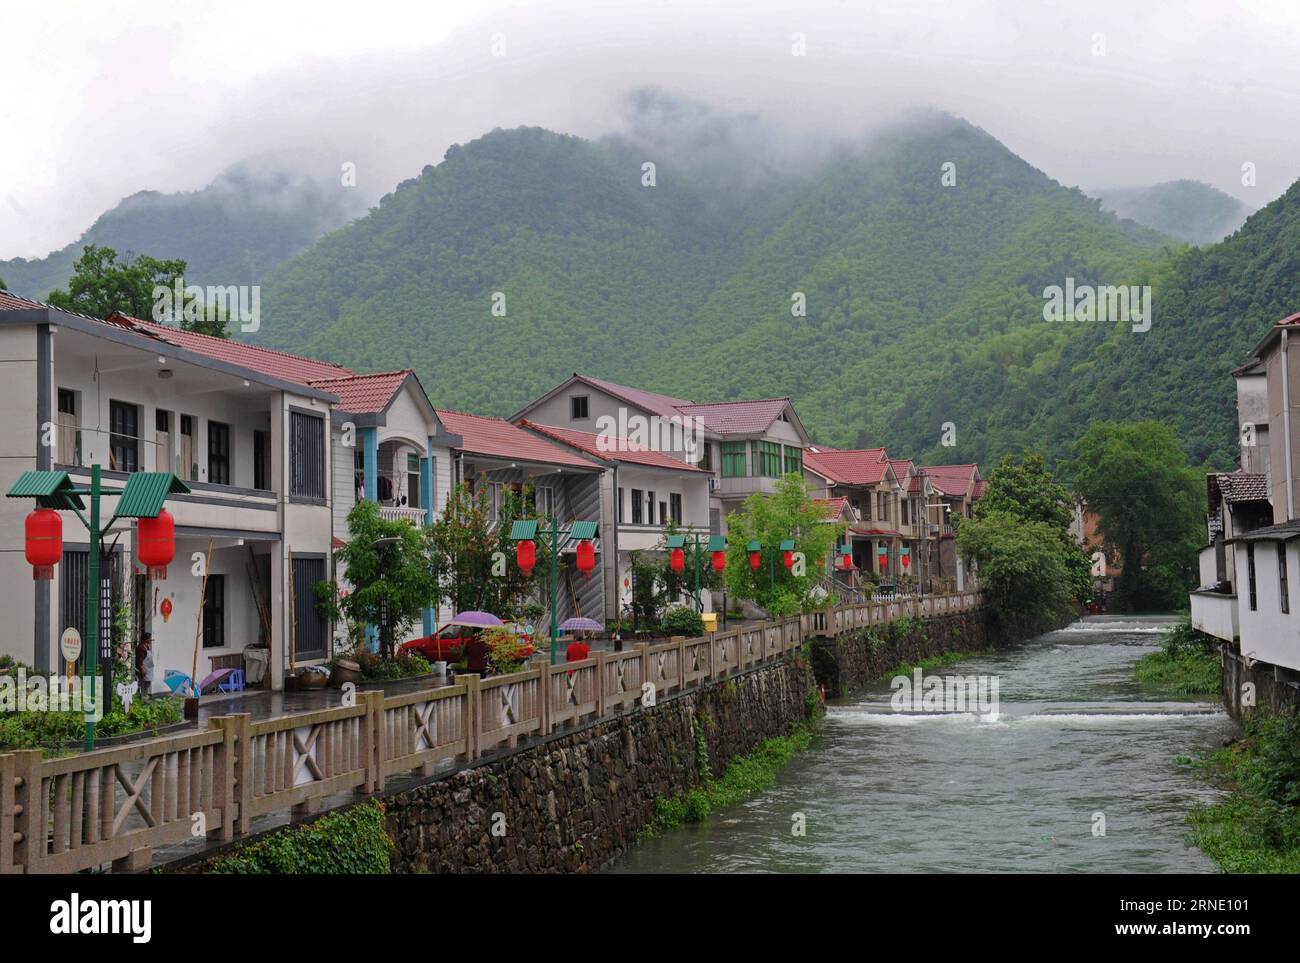 (160605) -- ANJI, June 5, 2016 -- Photo taken on June 3, 2016 shows the scenery of Shuangyi village, a national ecological model village, after rain in Anji County, east China s Zhejiang Province. Anji is known for its pleasant environment with flourishing bamboo plantations and many scenes from the famous movie Crouching Tiger, Hidden Dragon were shot here. The county persists in green, low-carbon development, and strives to protect environment as well as to develop local economy. June 5 is observed as World Environment Day every year, and this year s theme issued by China s Ministry of Envir Stock Photo